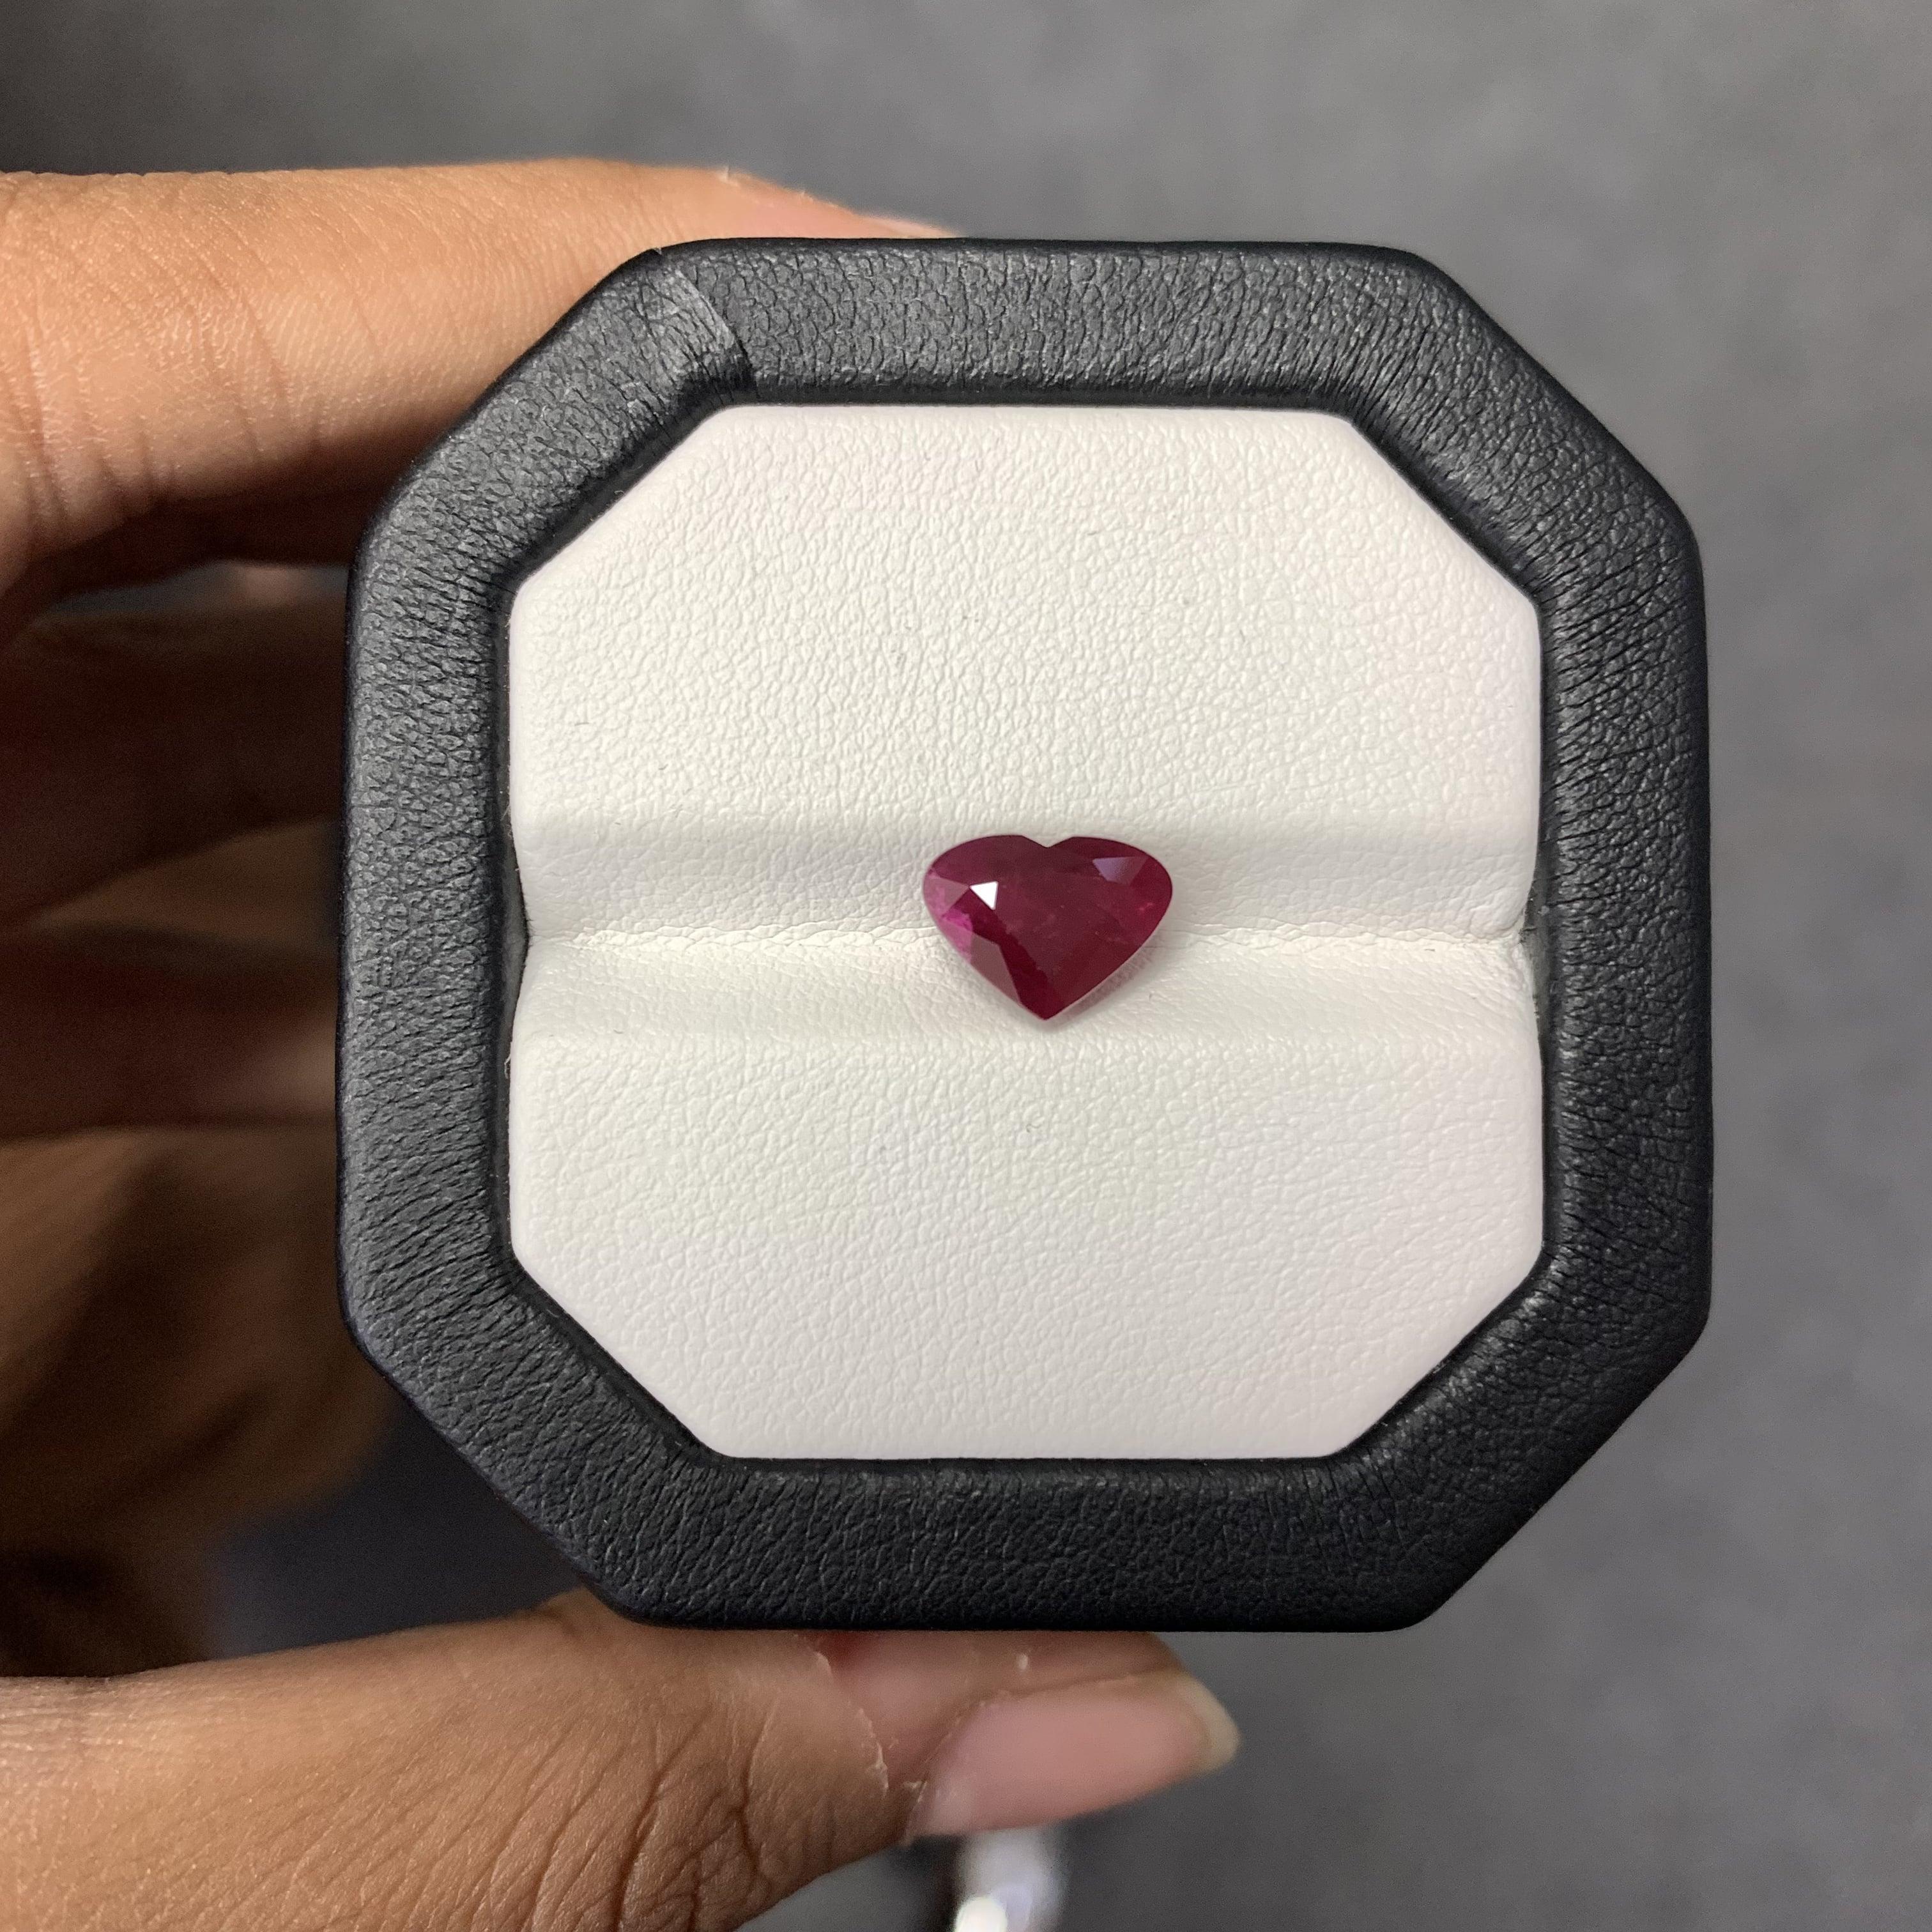 A stunning 2.47 Carat Ruby gemstone. It is completely natural and of good quality. The ruby is a heart shape and its color is a deep, pigeon blood red hue that is absolutely gorgeous!

The measurements of the Ruby stone are 9.87 x 7.42 x